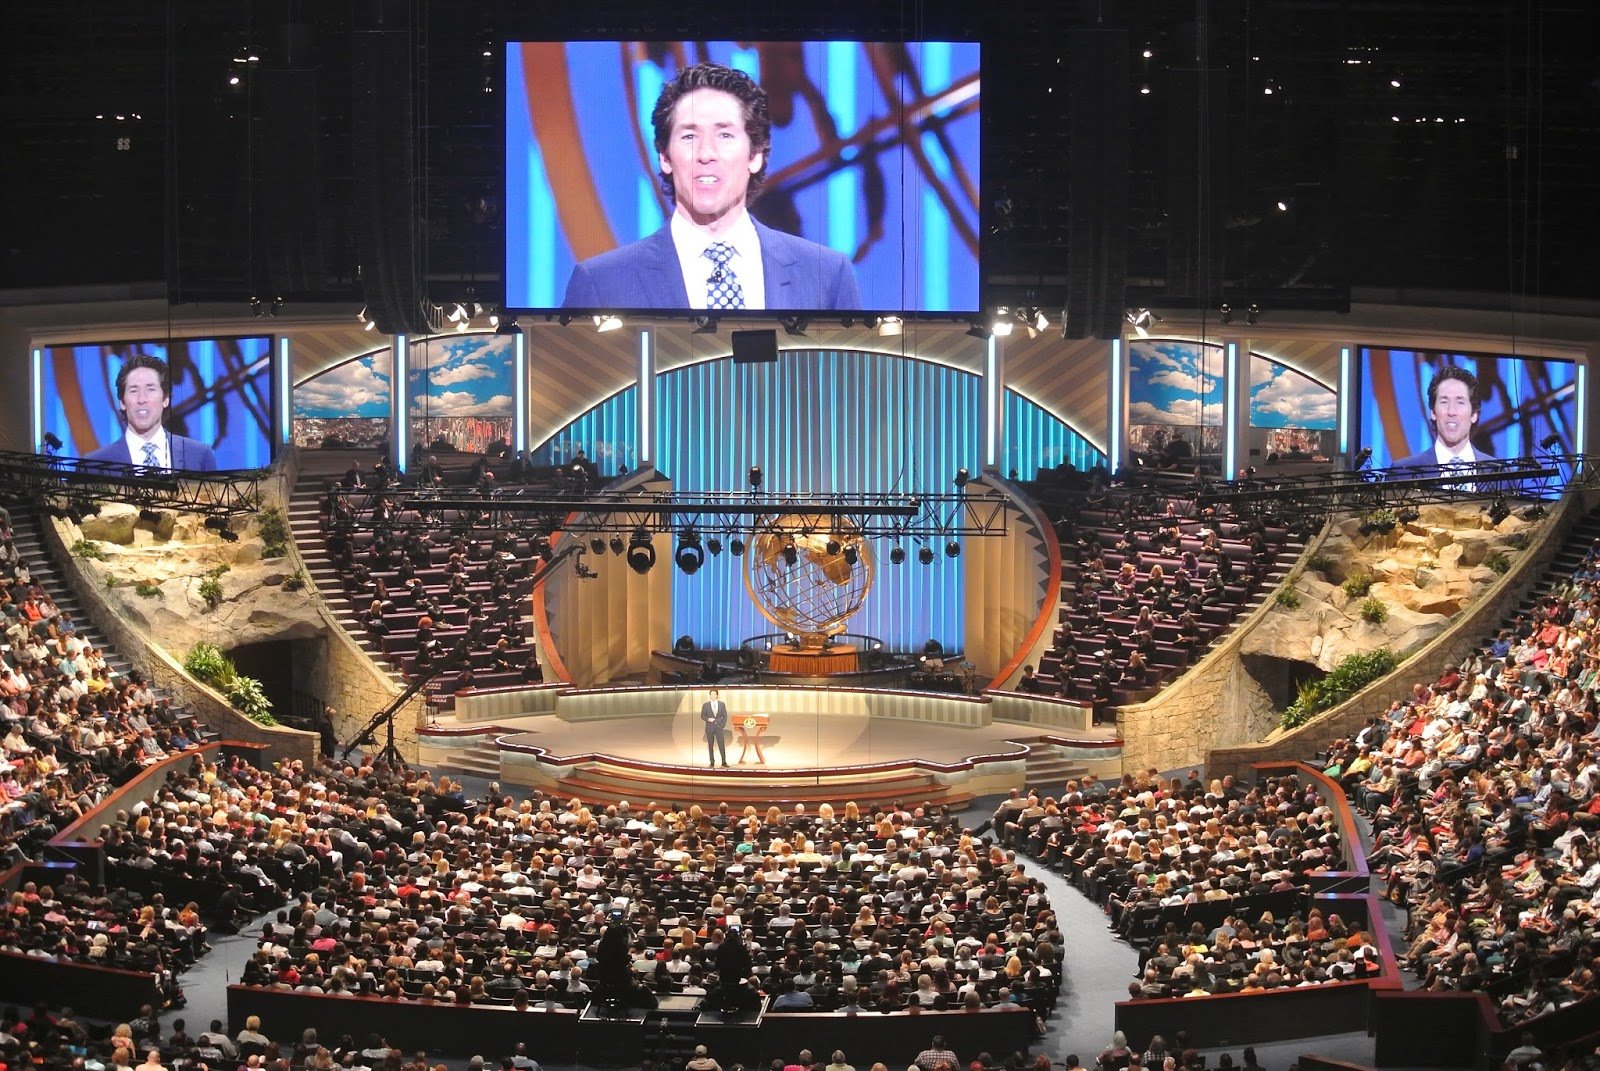 Are mega churches just businesses masquerading as worship? – Film Daily